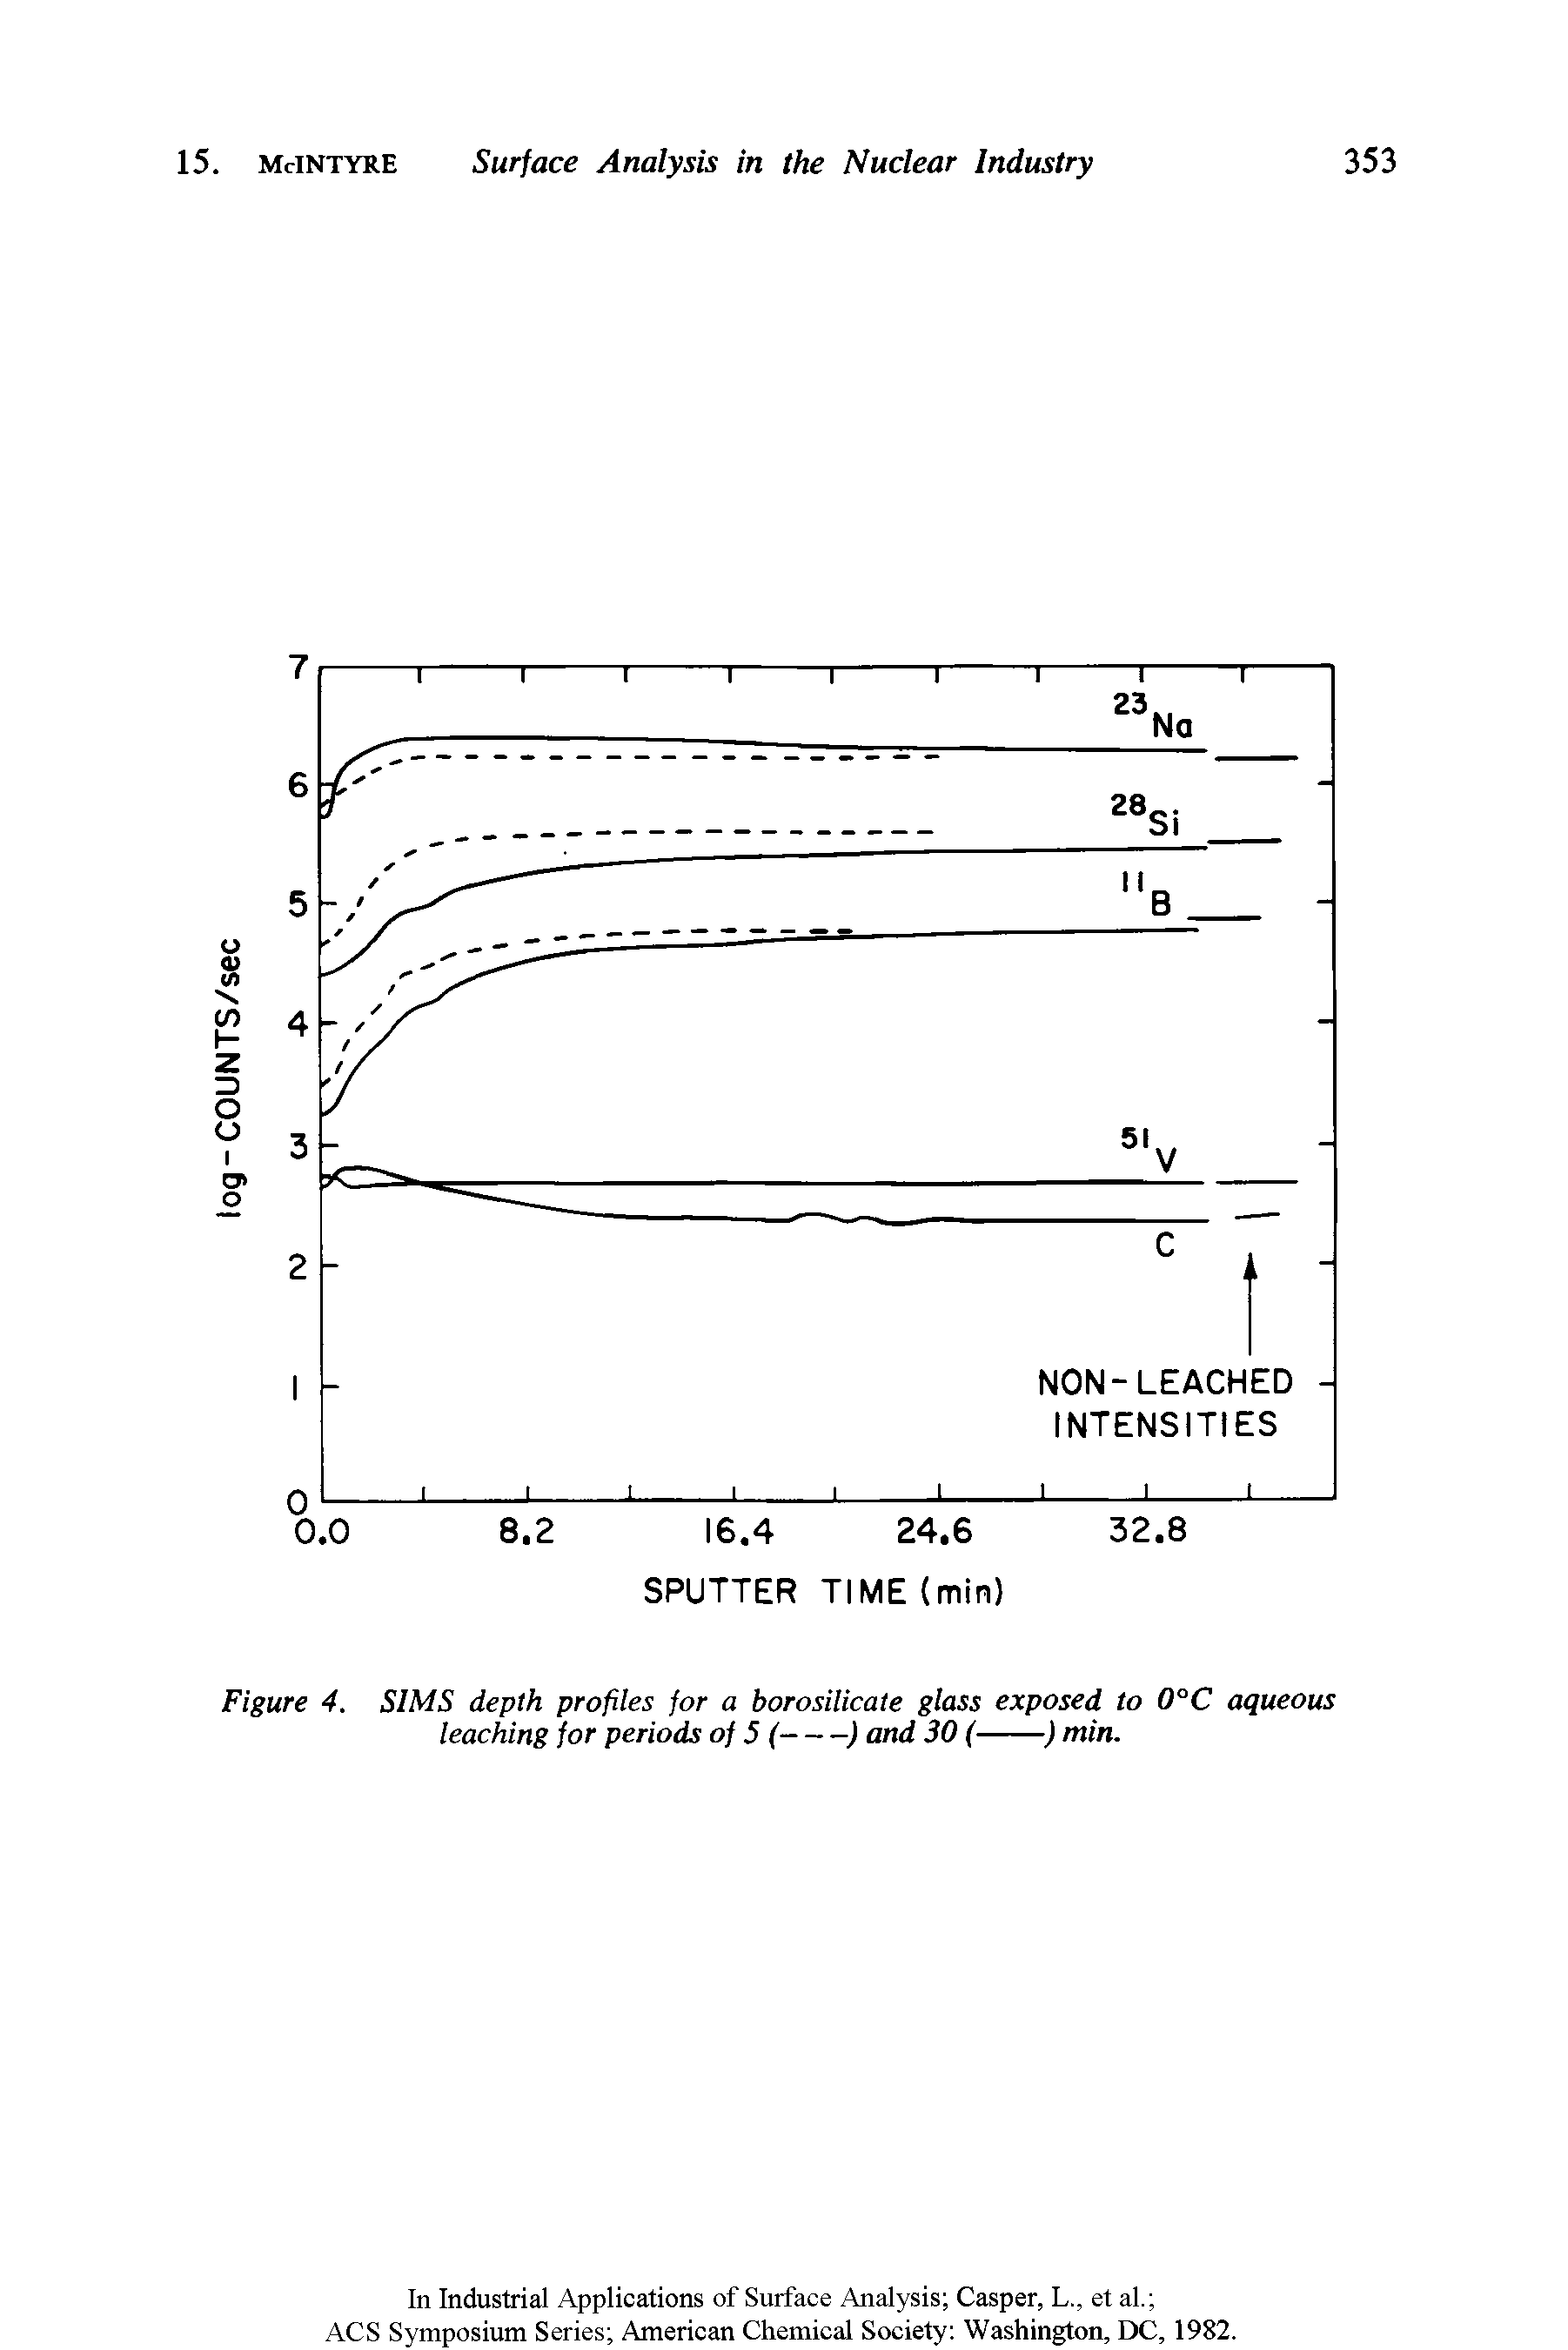 Figure 4. SIMS depth profiles for a borosilicate glass exposed to 0°C aqueous leaching for periods of 5 (-----------------------) and 30 (------) min.